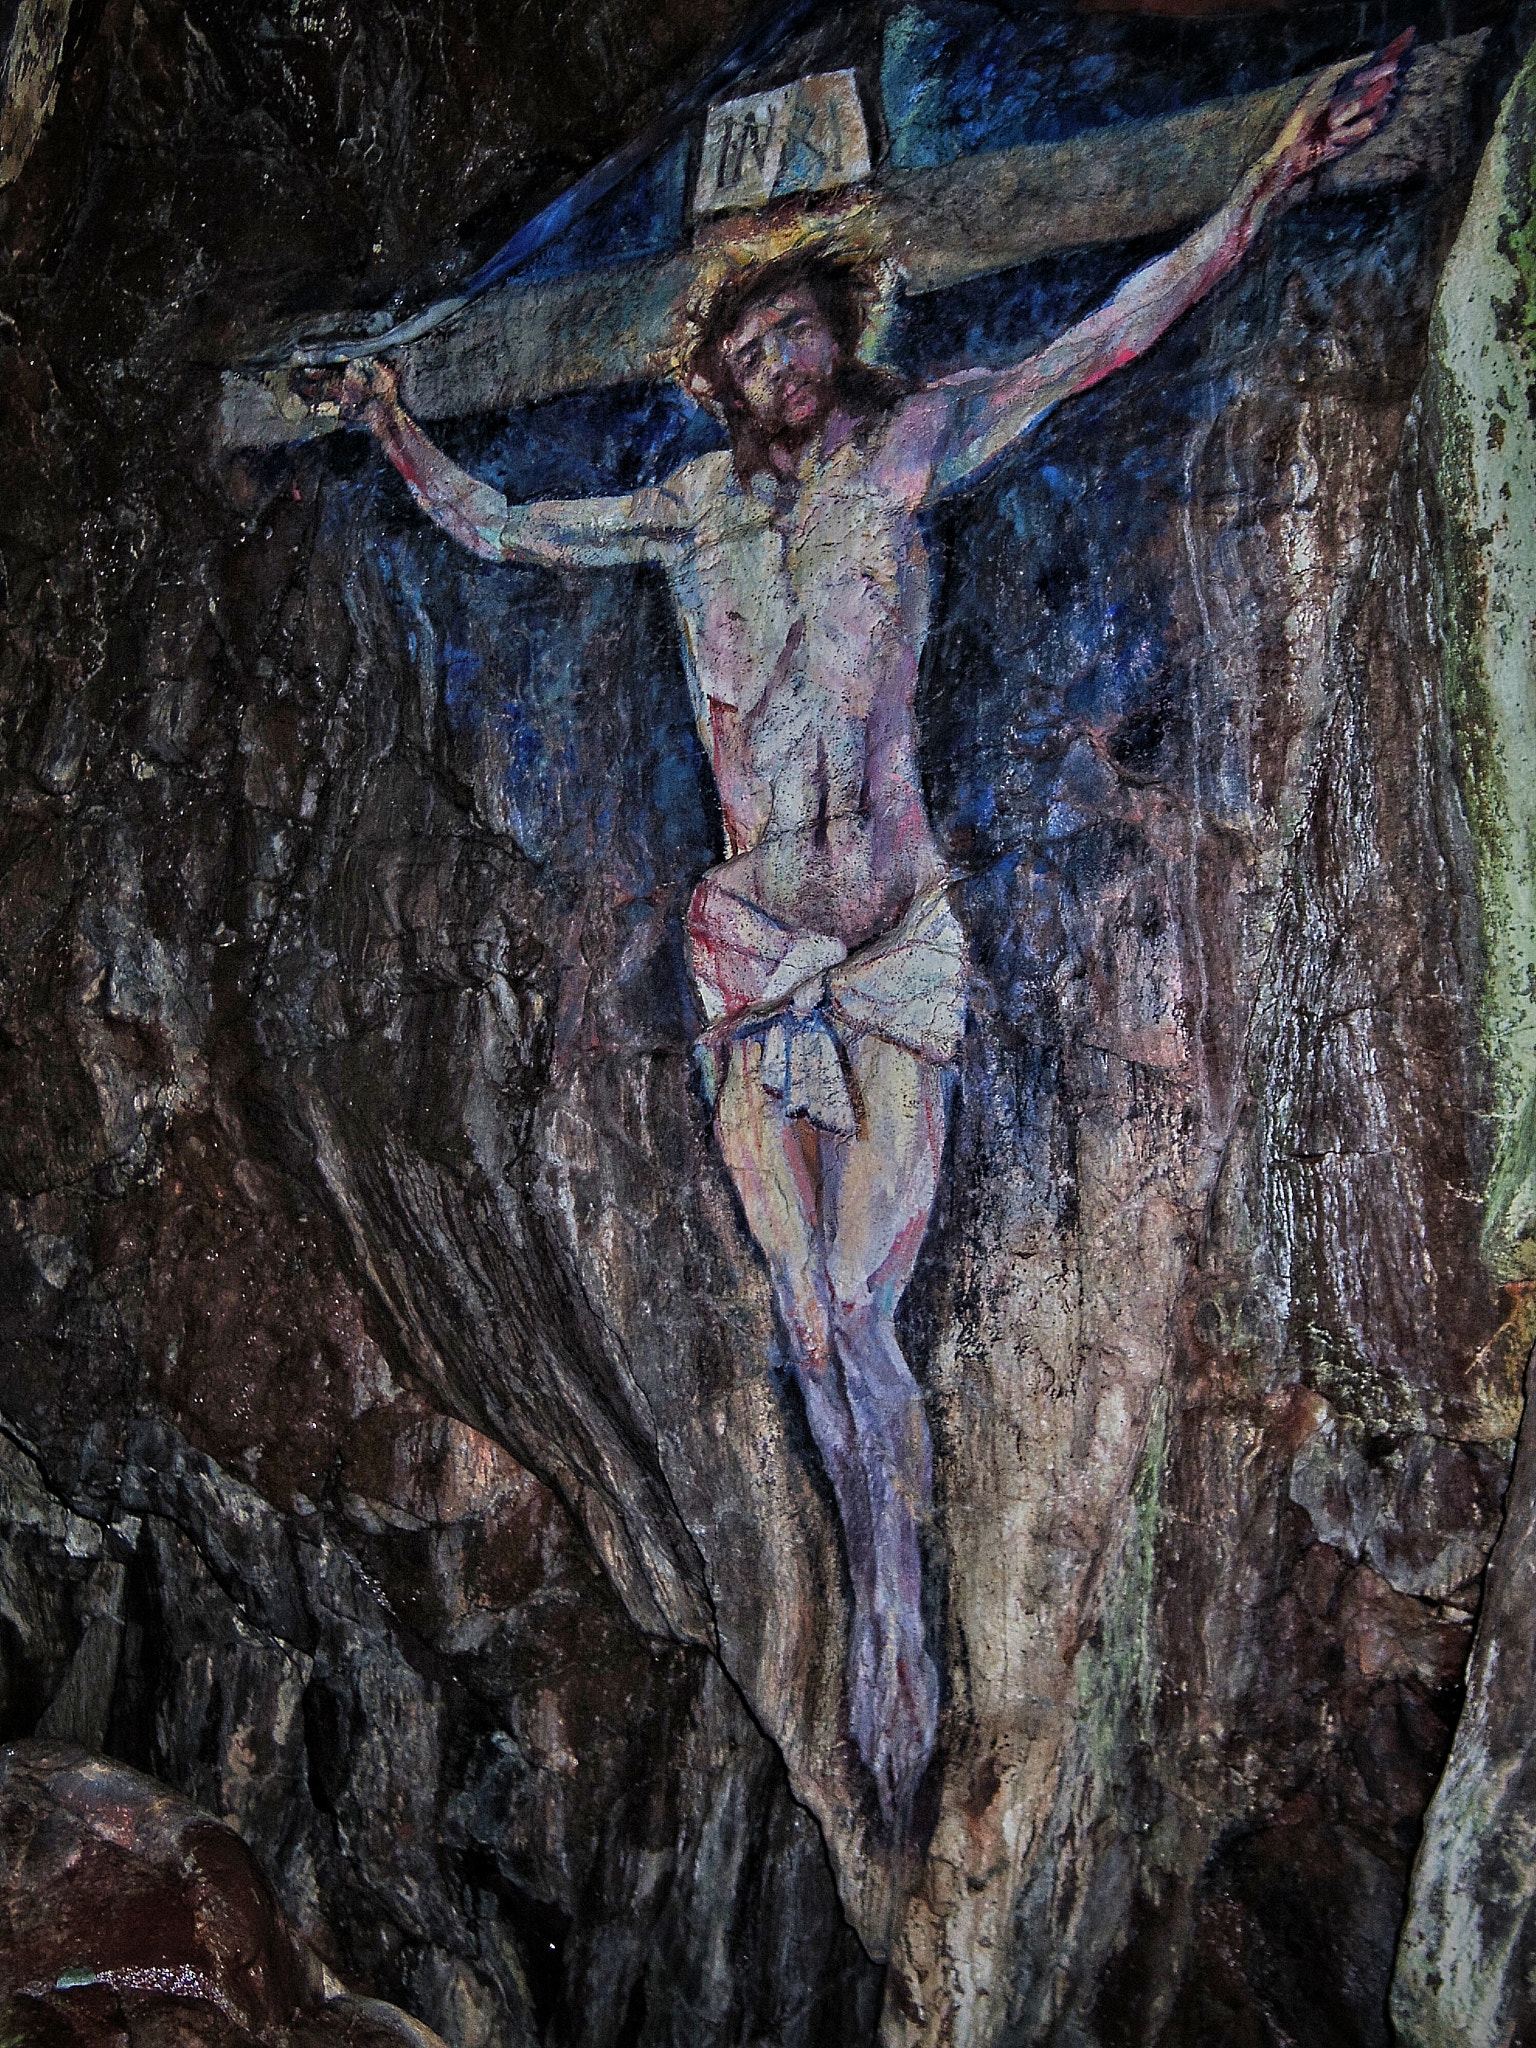 Pentax Q sample photo. Cave painting of the crucifixion, davaar island, kintyre photography